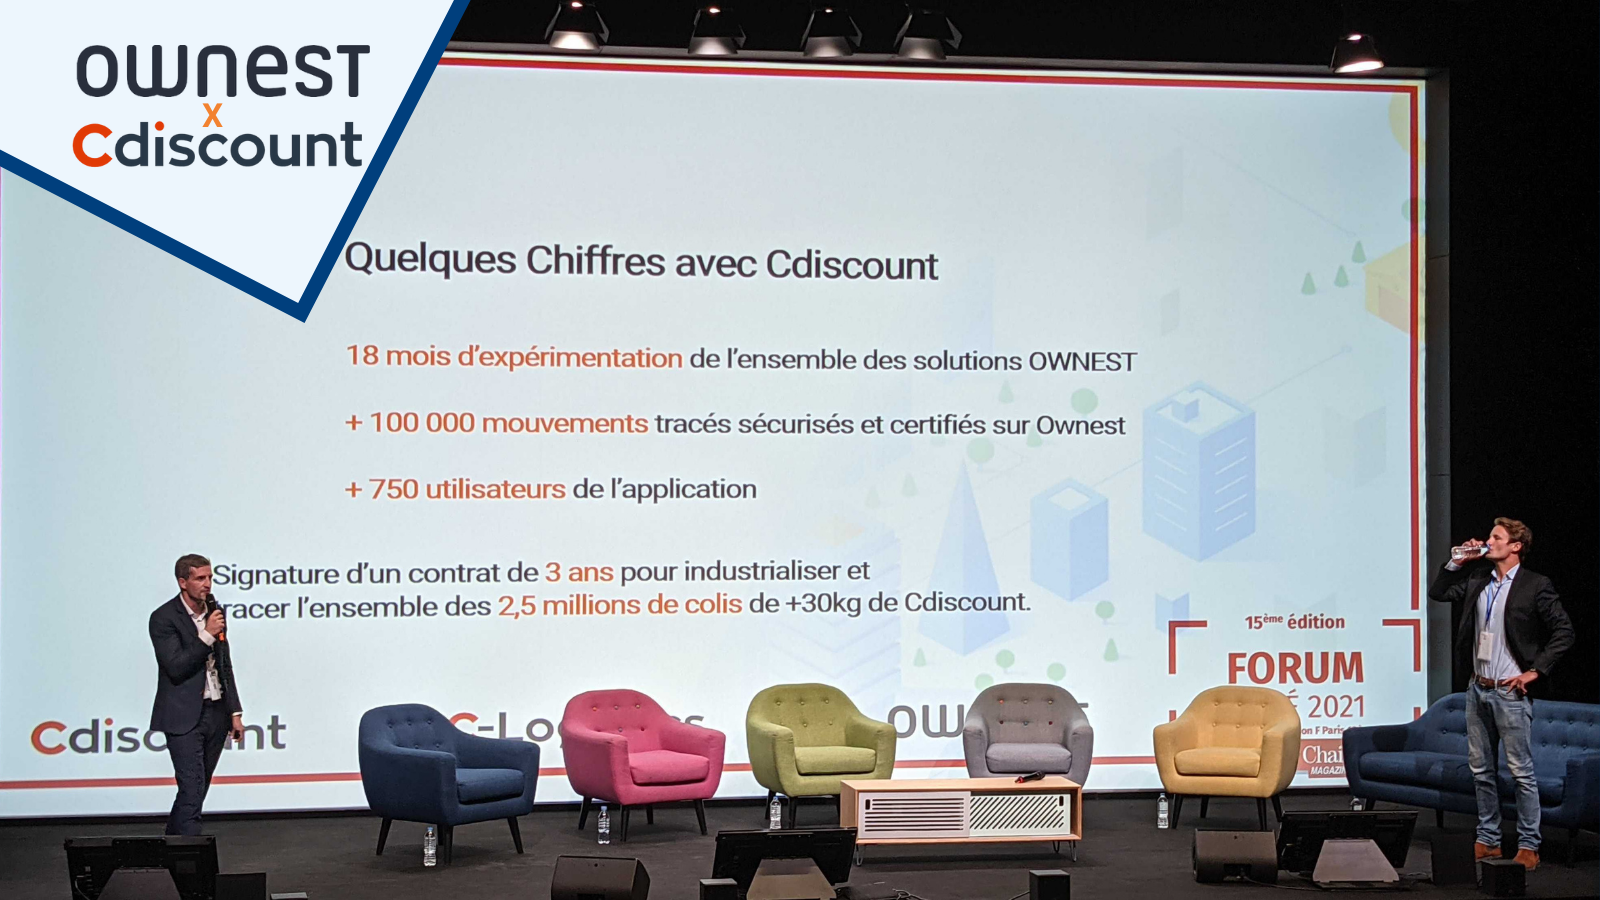 Ownest cdiscount collaboration S Cmag forum 2021